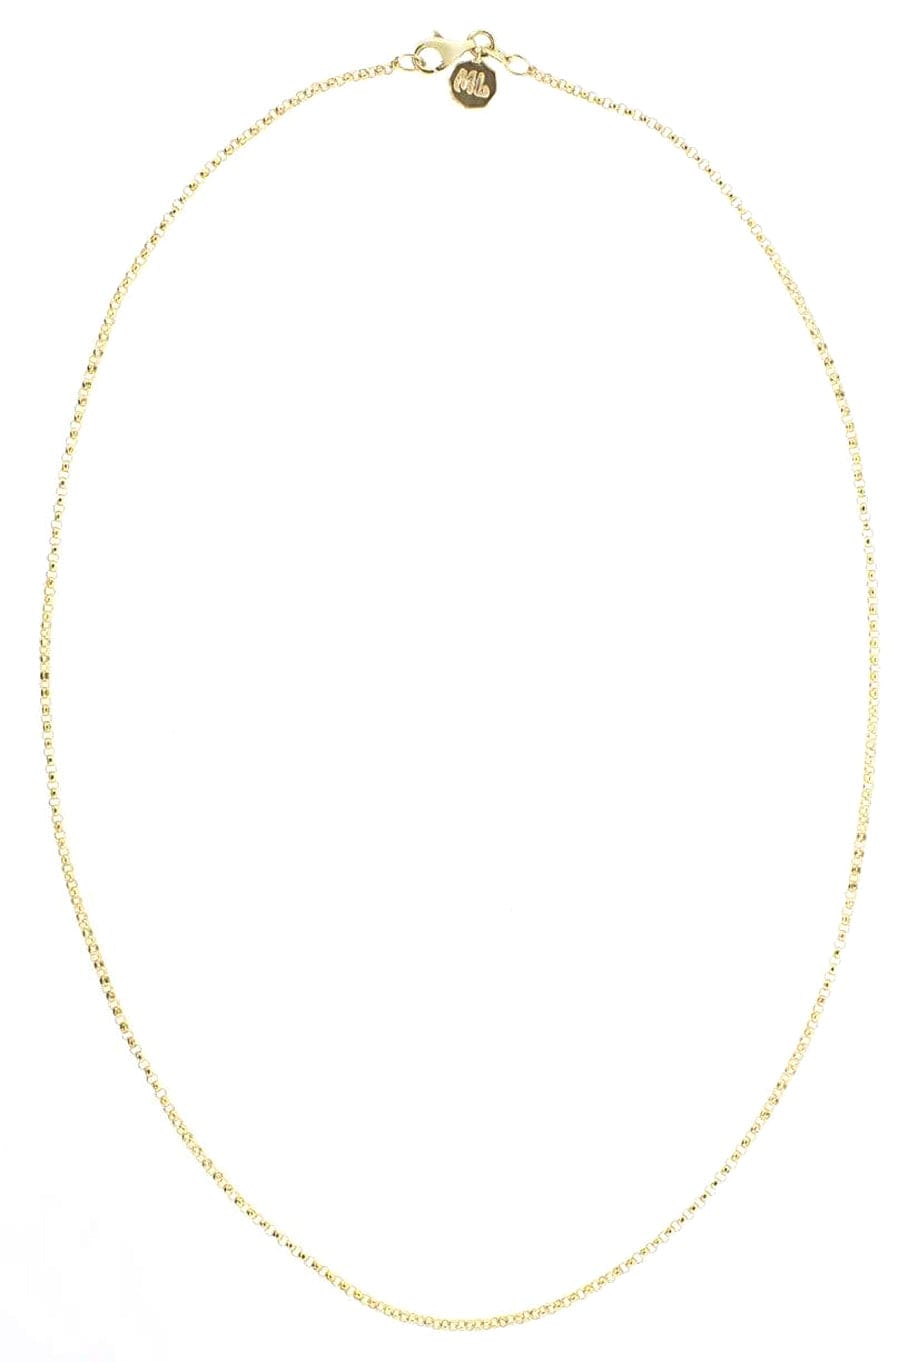 MARLO LAZ-18 Inch 1.8 Rolo Chain - Yellow Gold-YELLOW GOLD